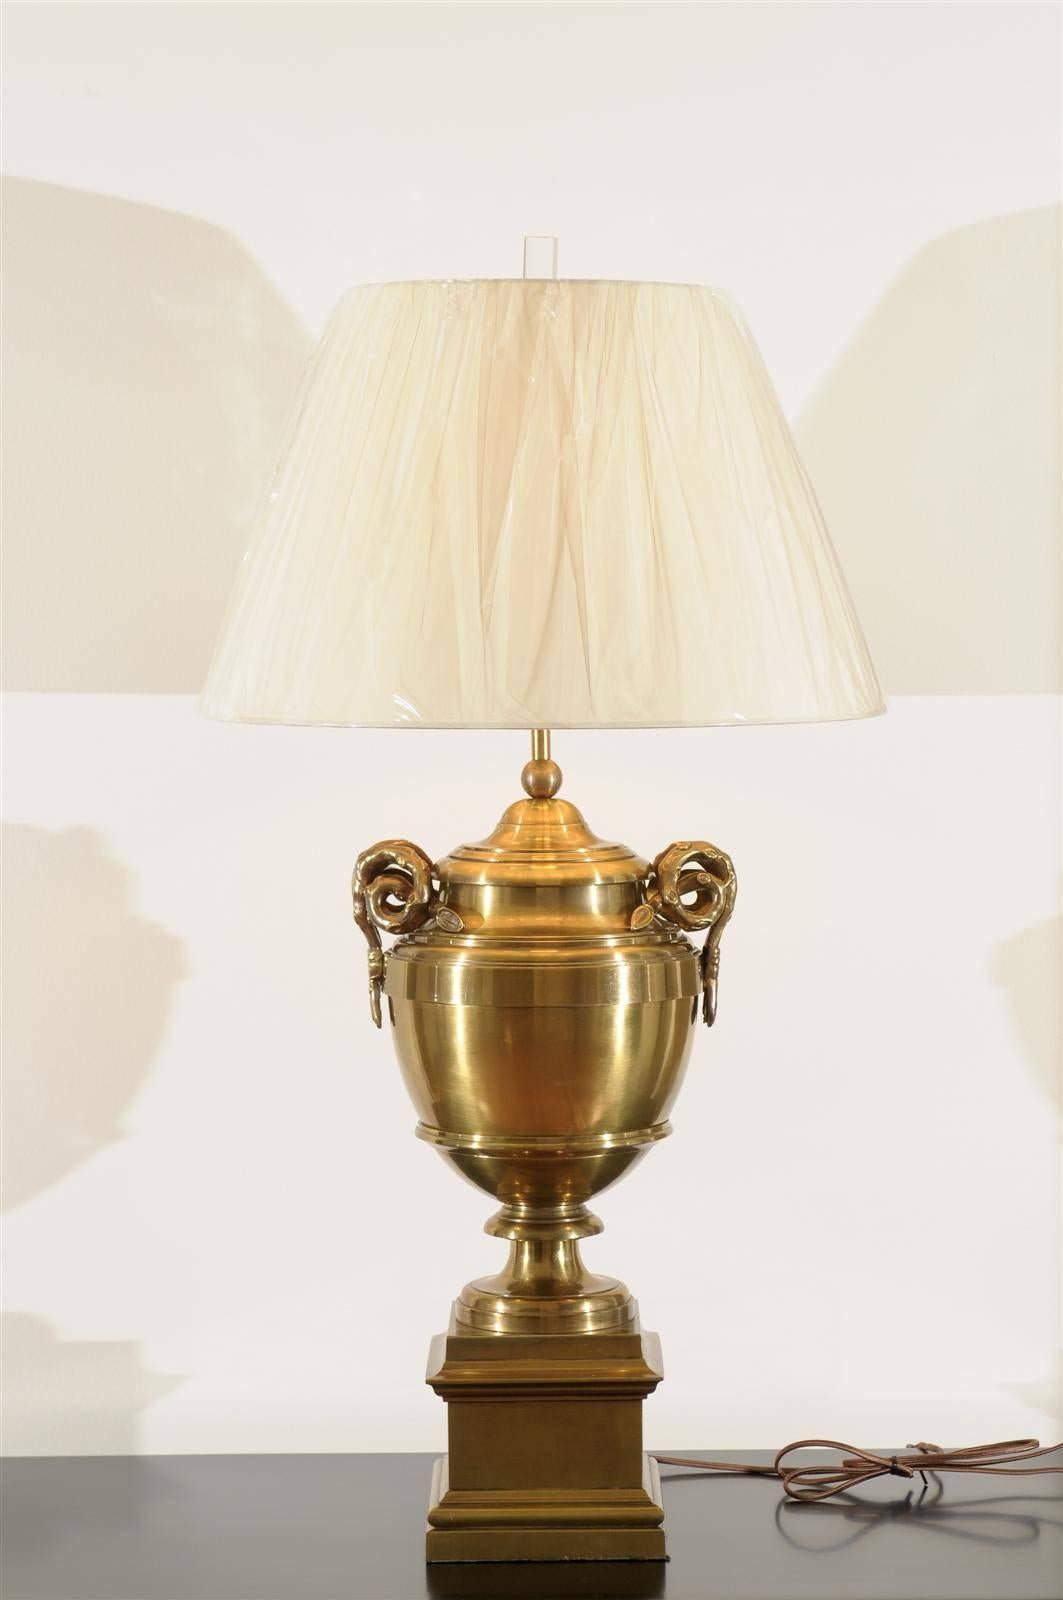 A stunning pair of large-scale vintage brass urn lamps. Heavy cast brass with wonderful detail. The clever vine handle design is a whimsical interpretation/variation of the Classic 